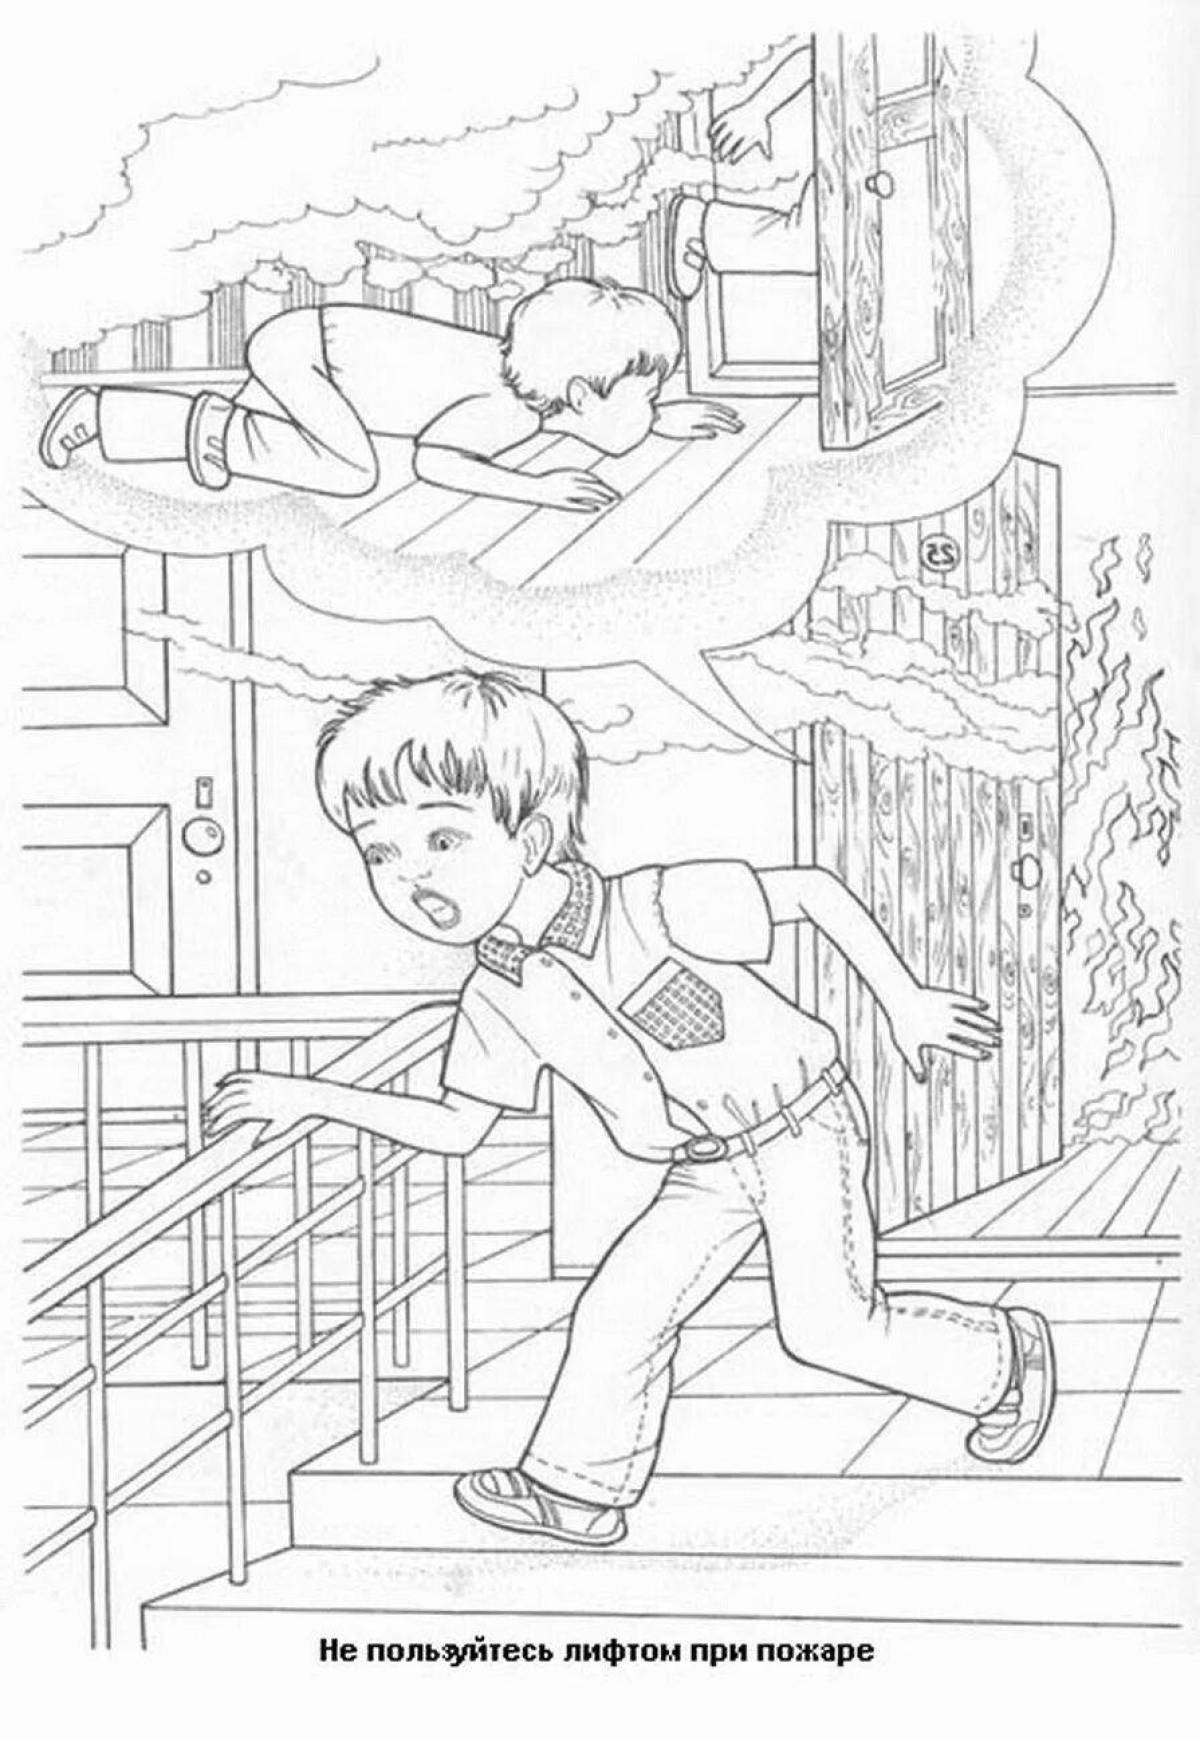 Color-brilliant home security coloring page